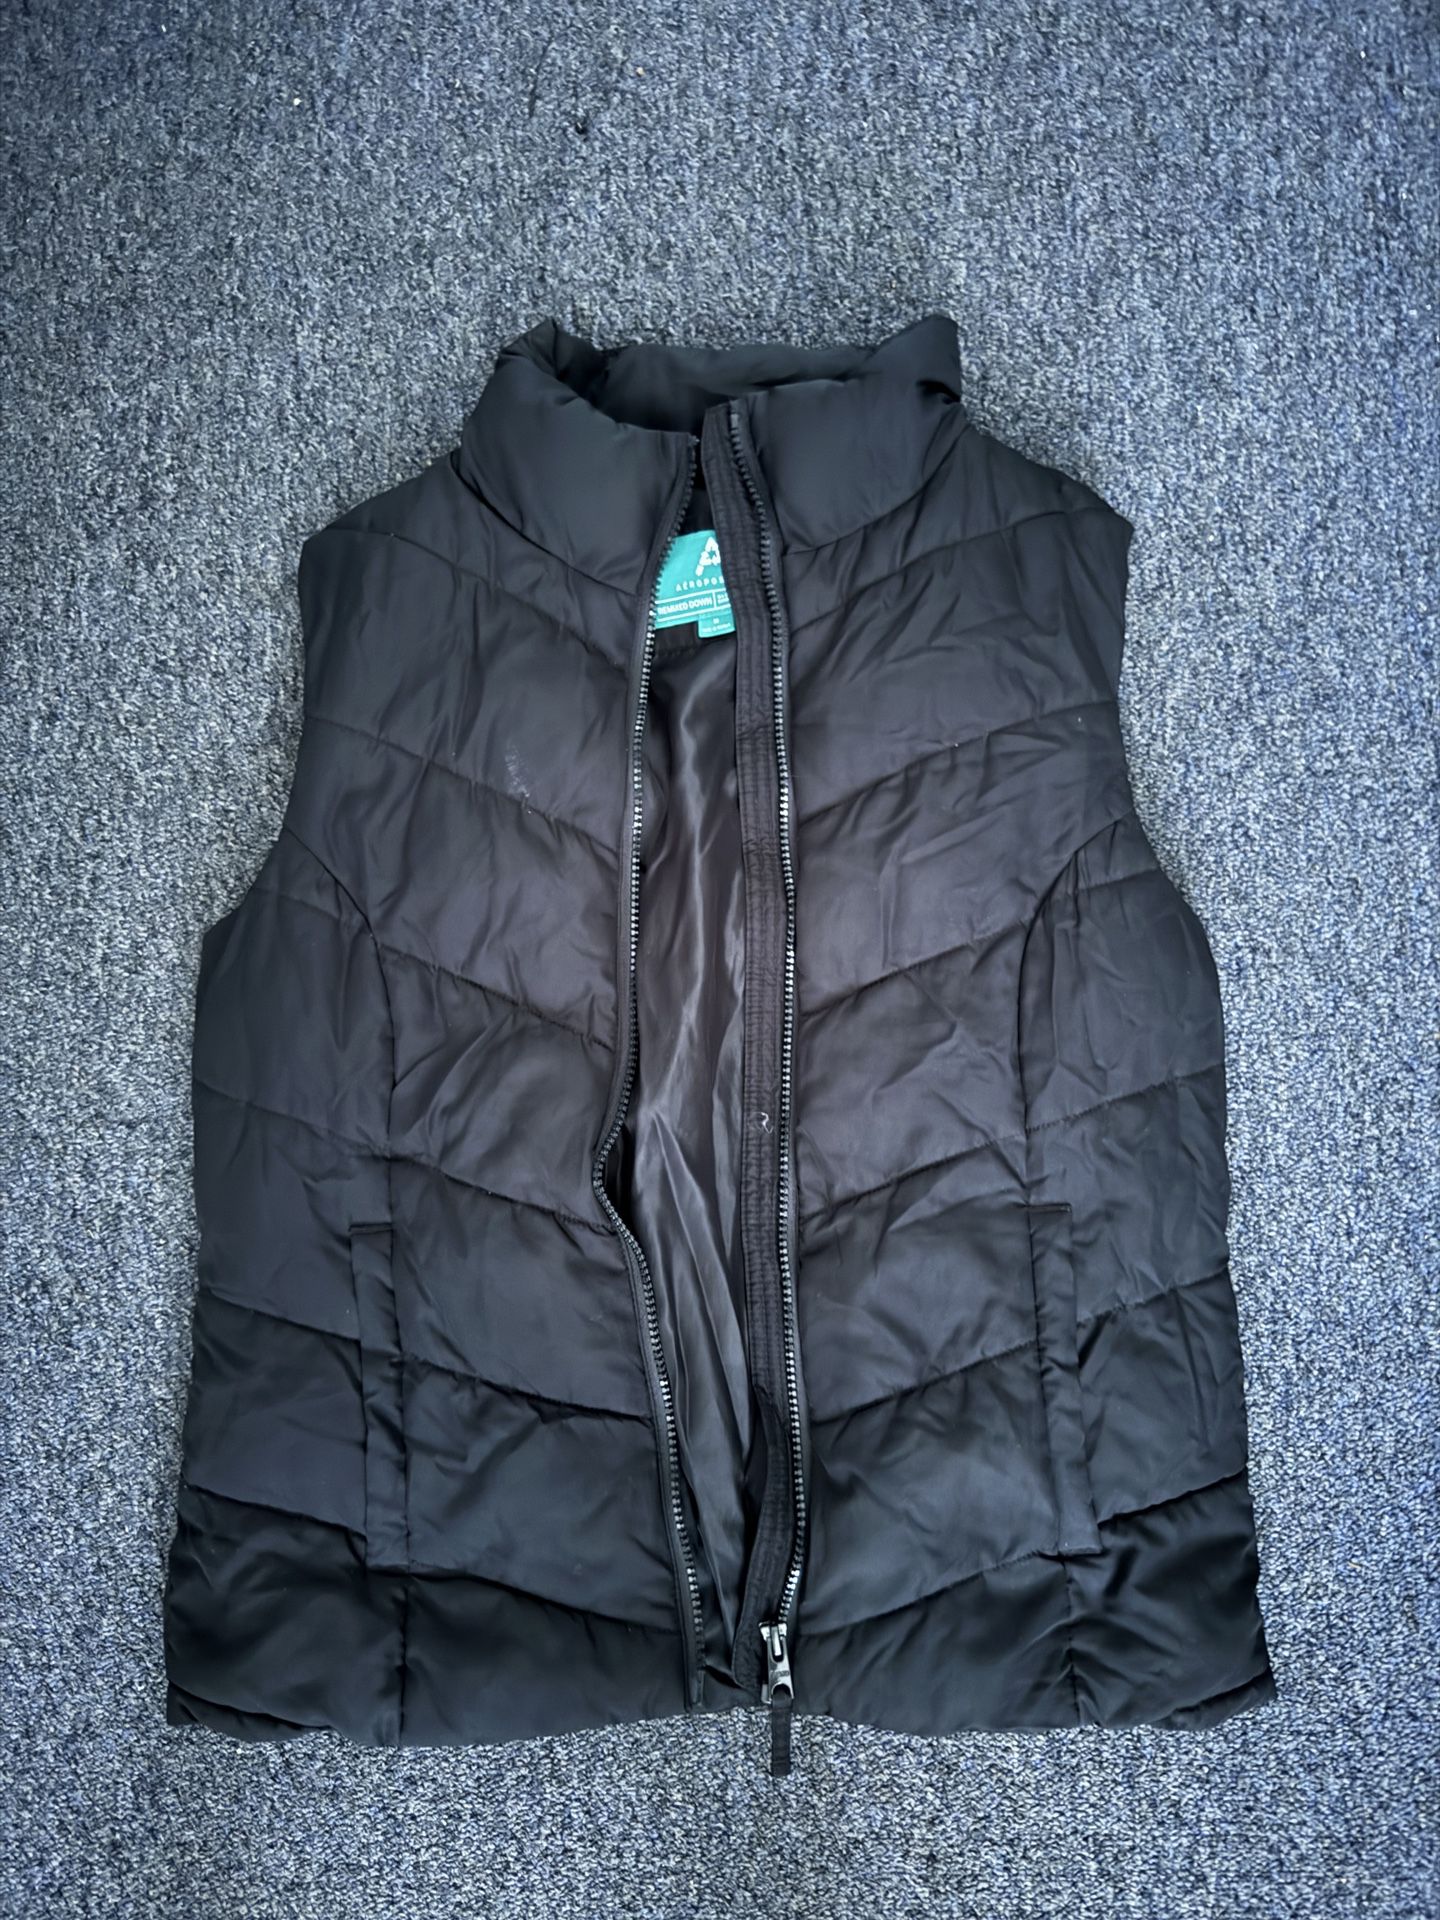 Women Bubble Vest  Aero Womens M  Open To Offers  Used Good Condition